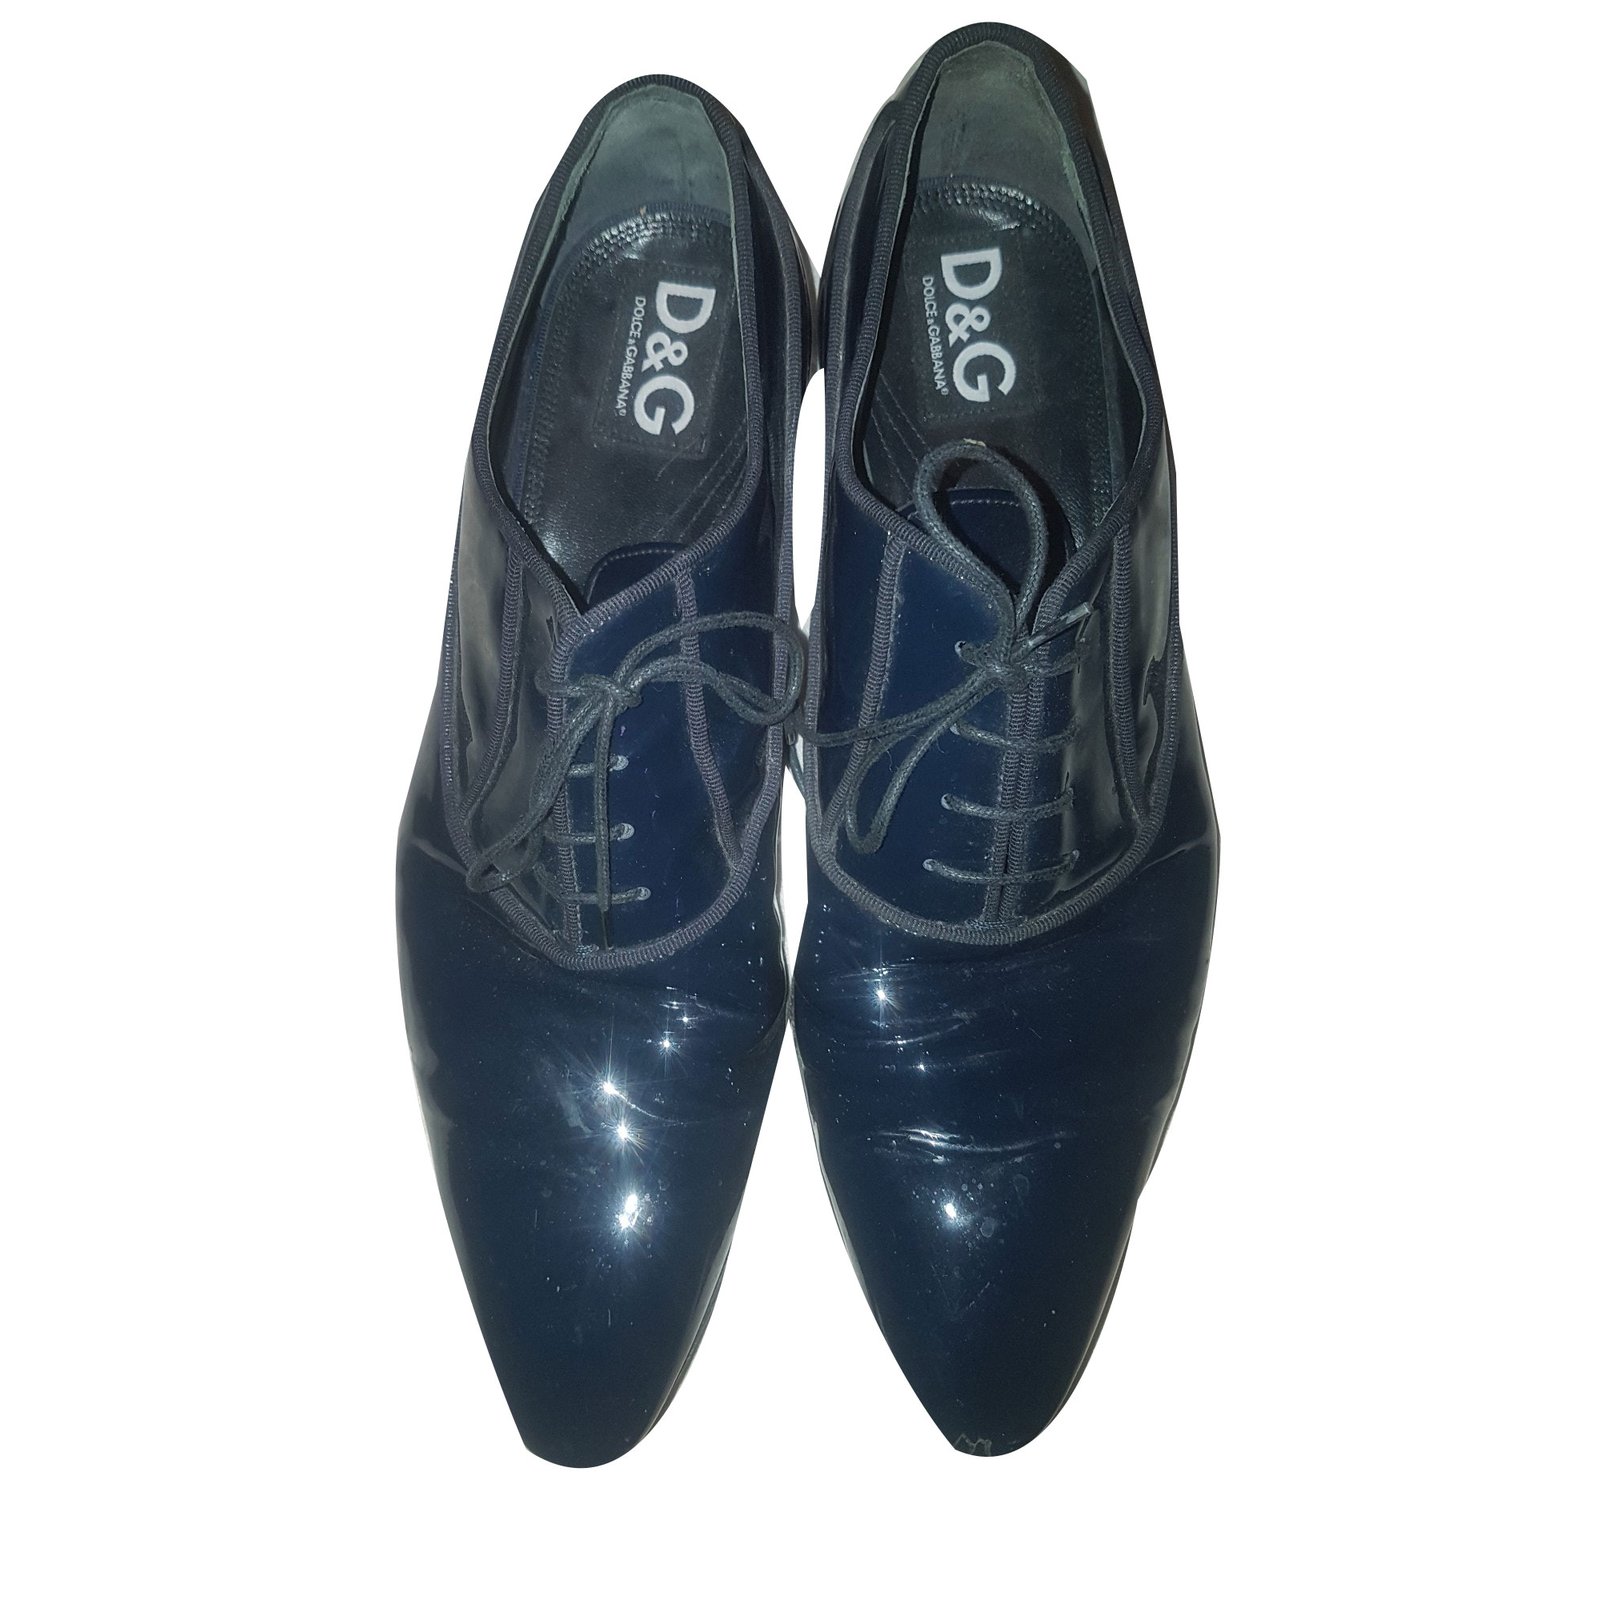 Mens Shoes Lace-ups Brogues Dolce & Gabbana Leather Lace-up Shoes in Dark Blue Blue for Men 